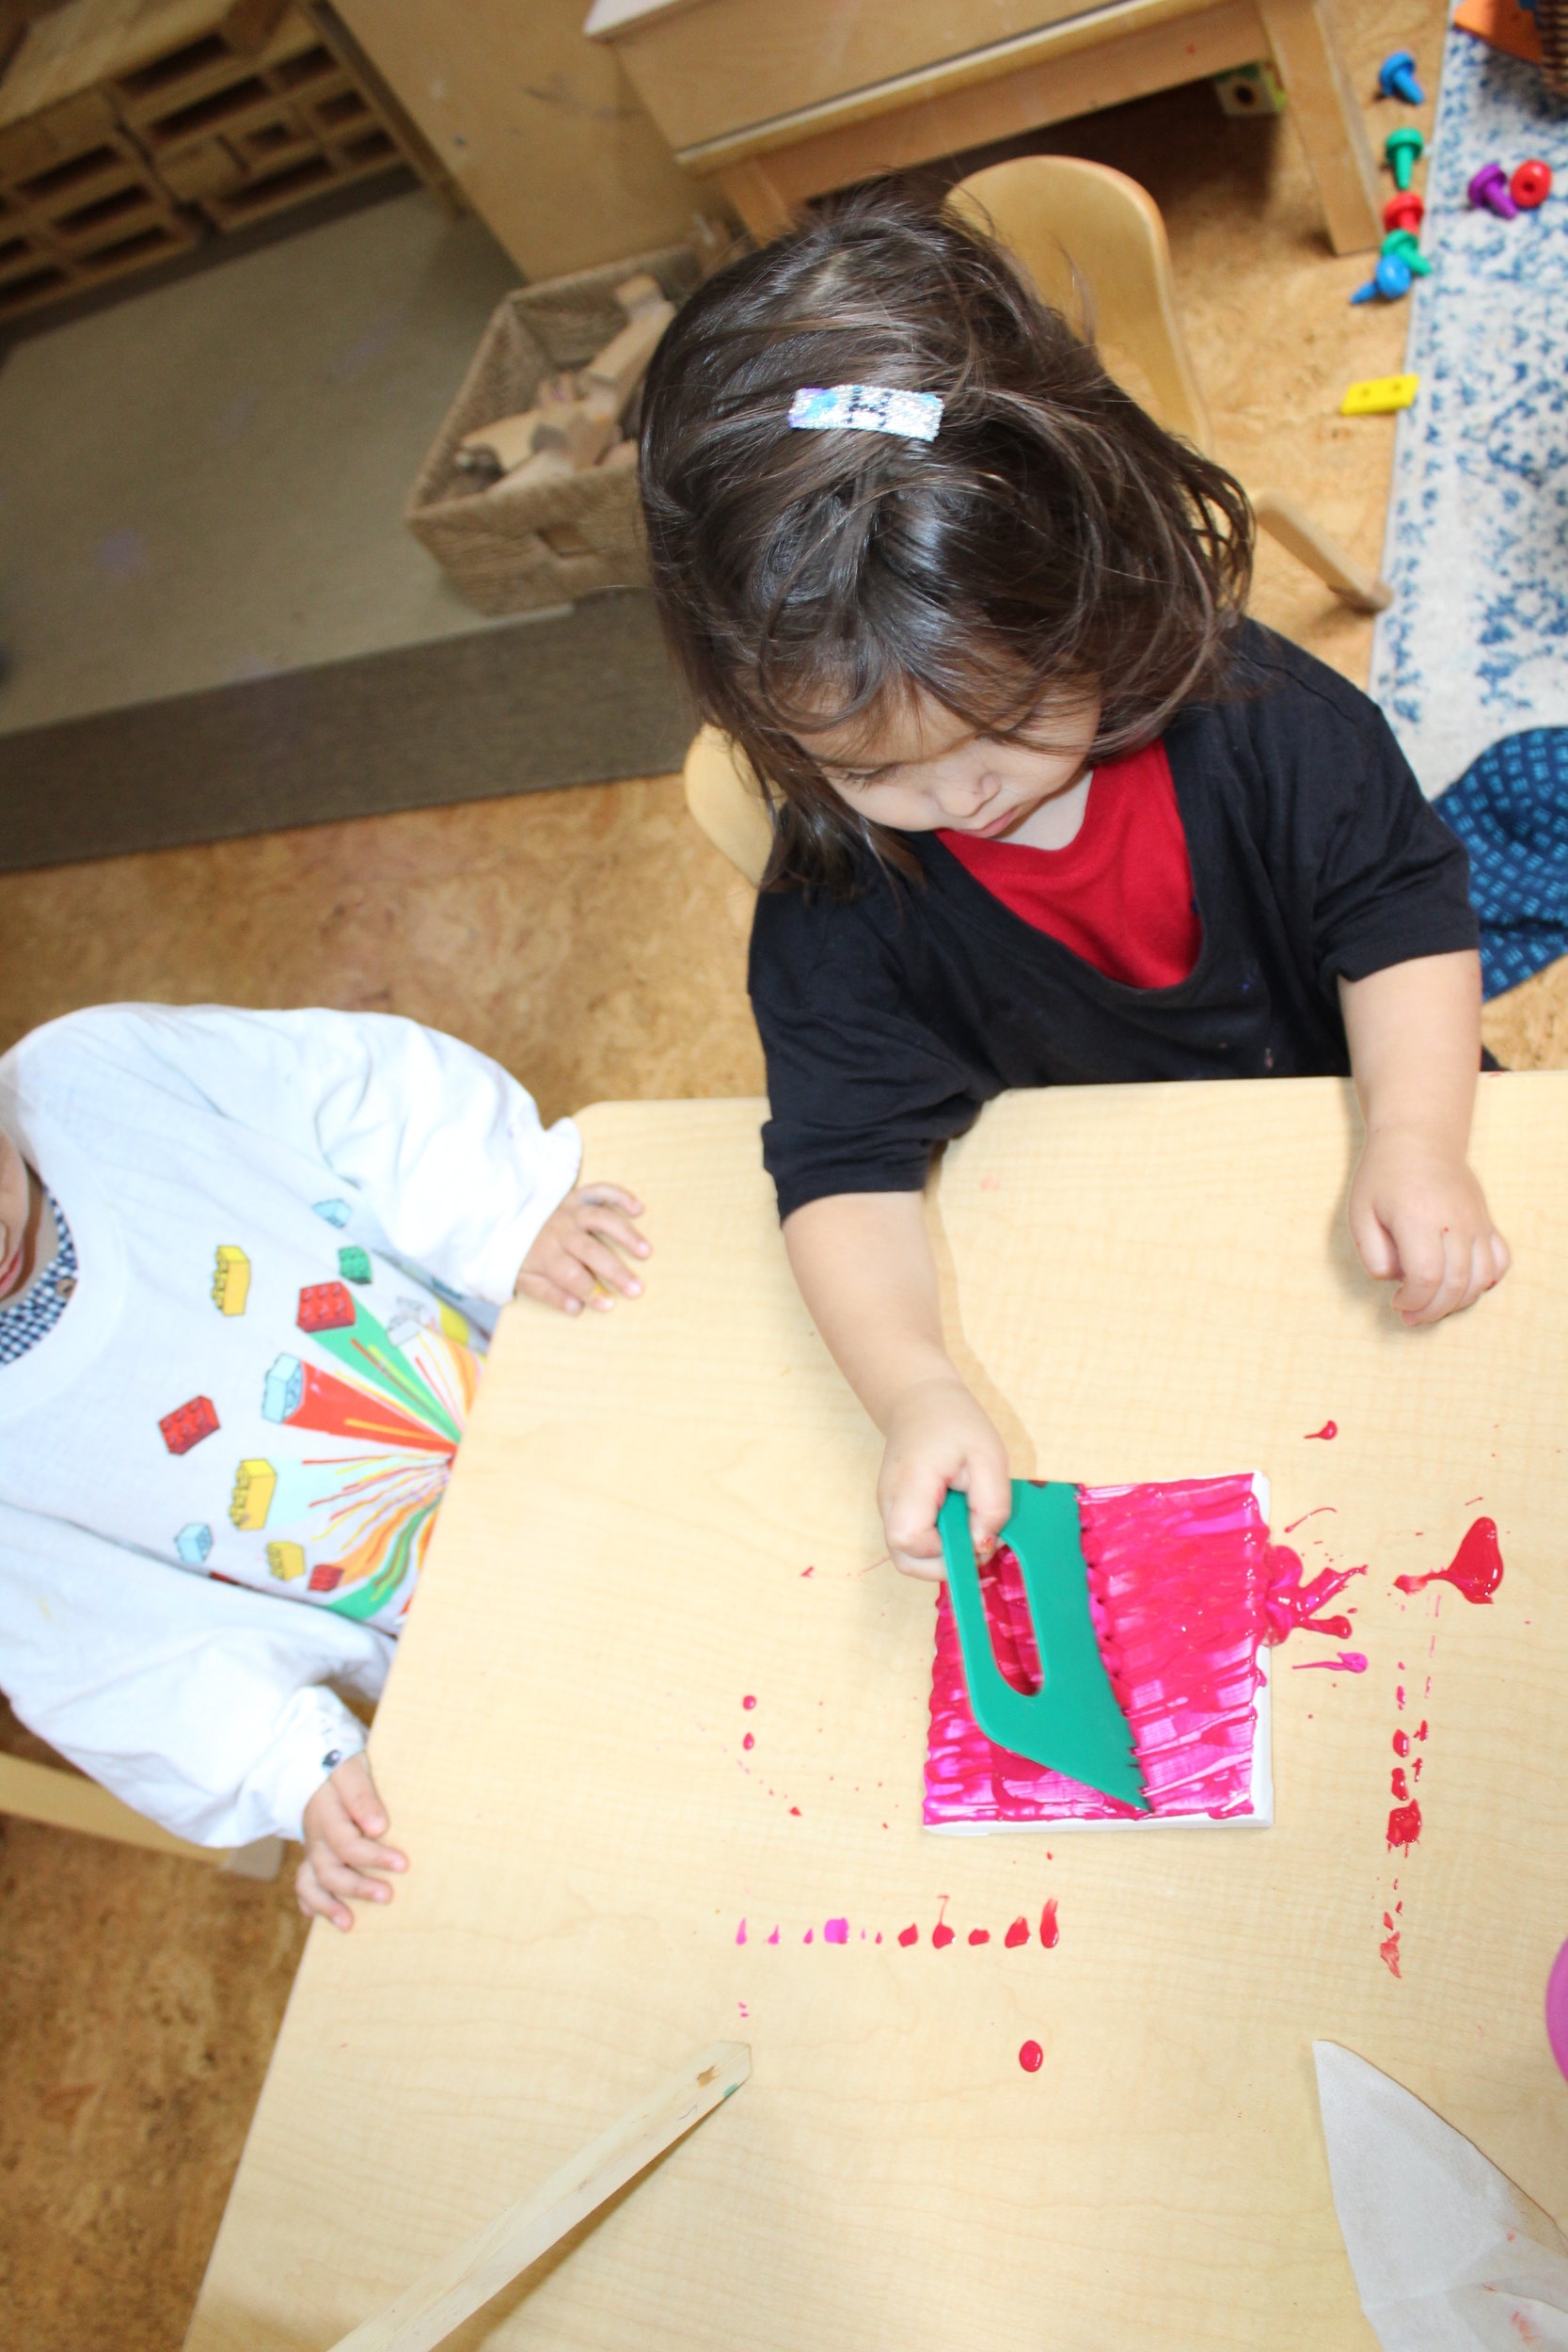  The children used one&nbsp;of the tools that are used for clay or play dough exploration, to create unique patterns on their art pieces.&nbsp;&nbsp;   